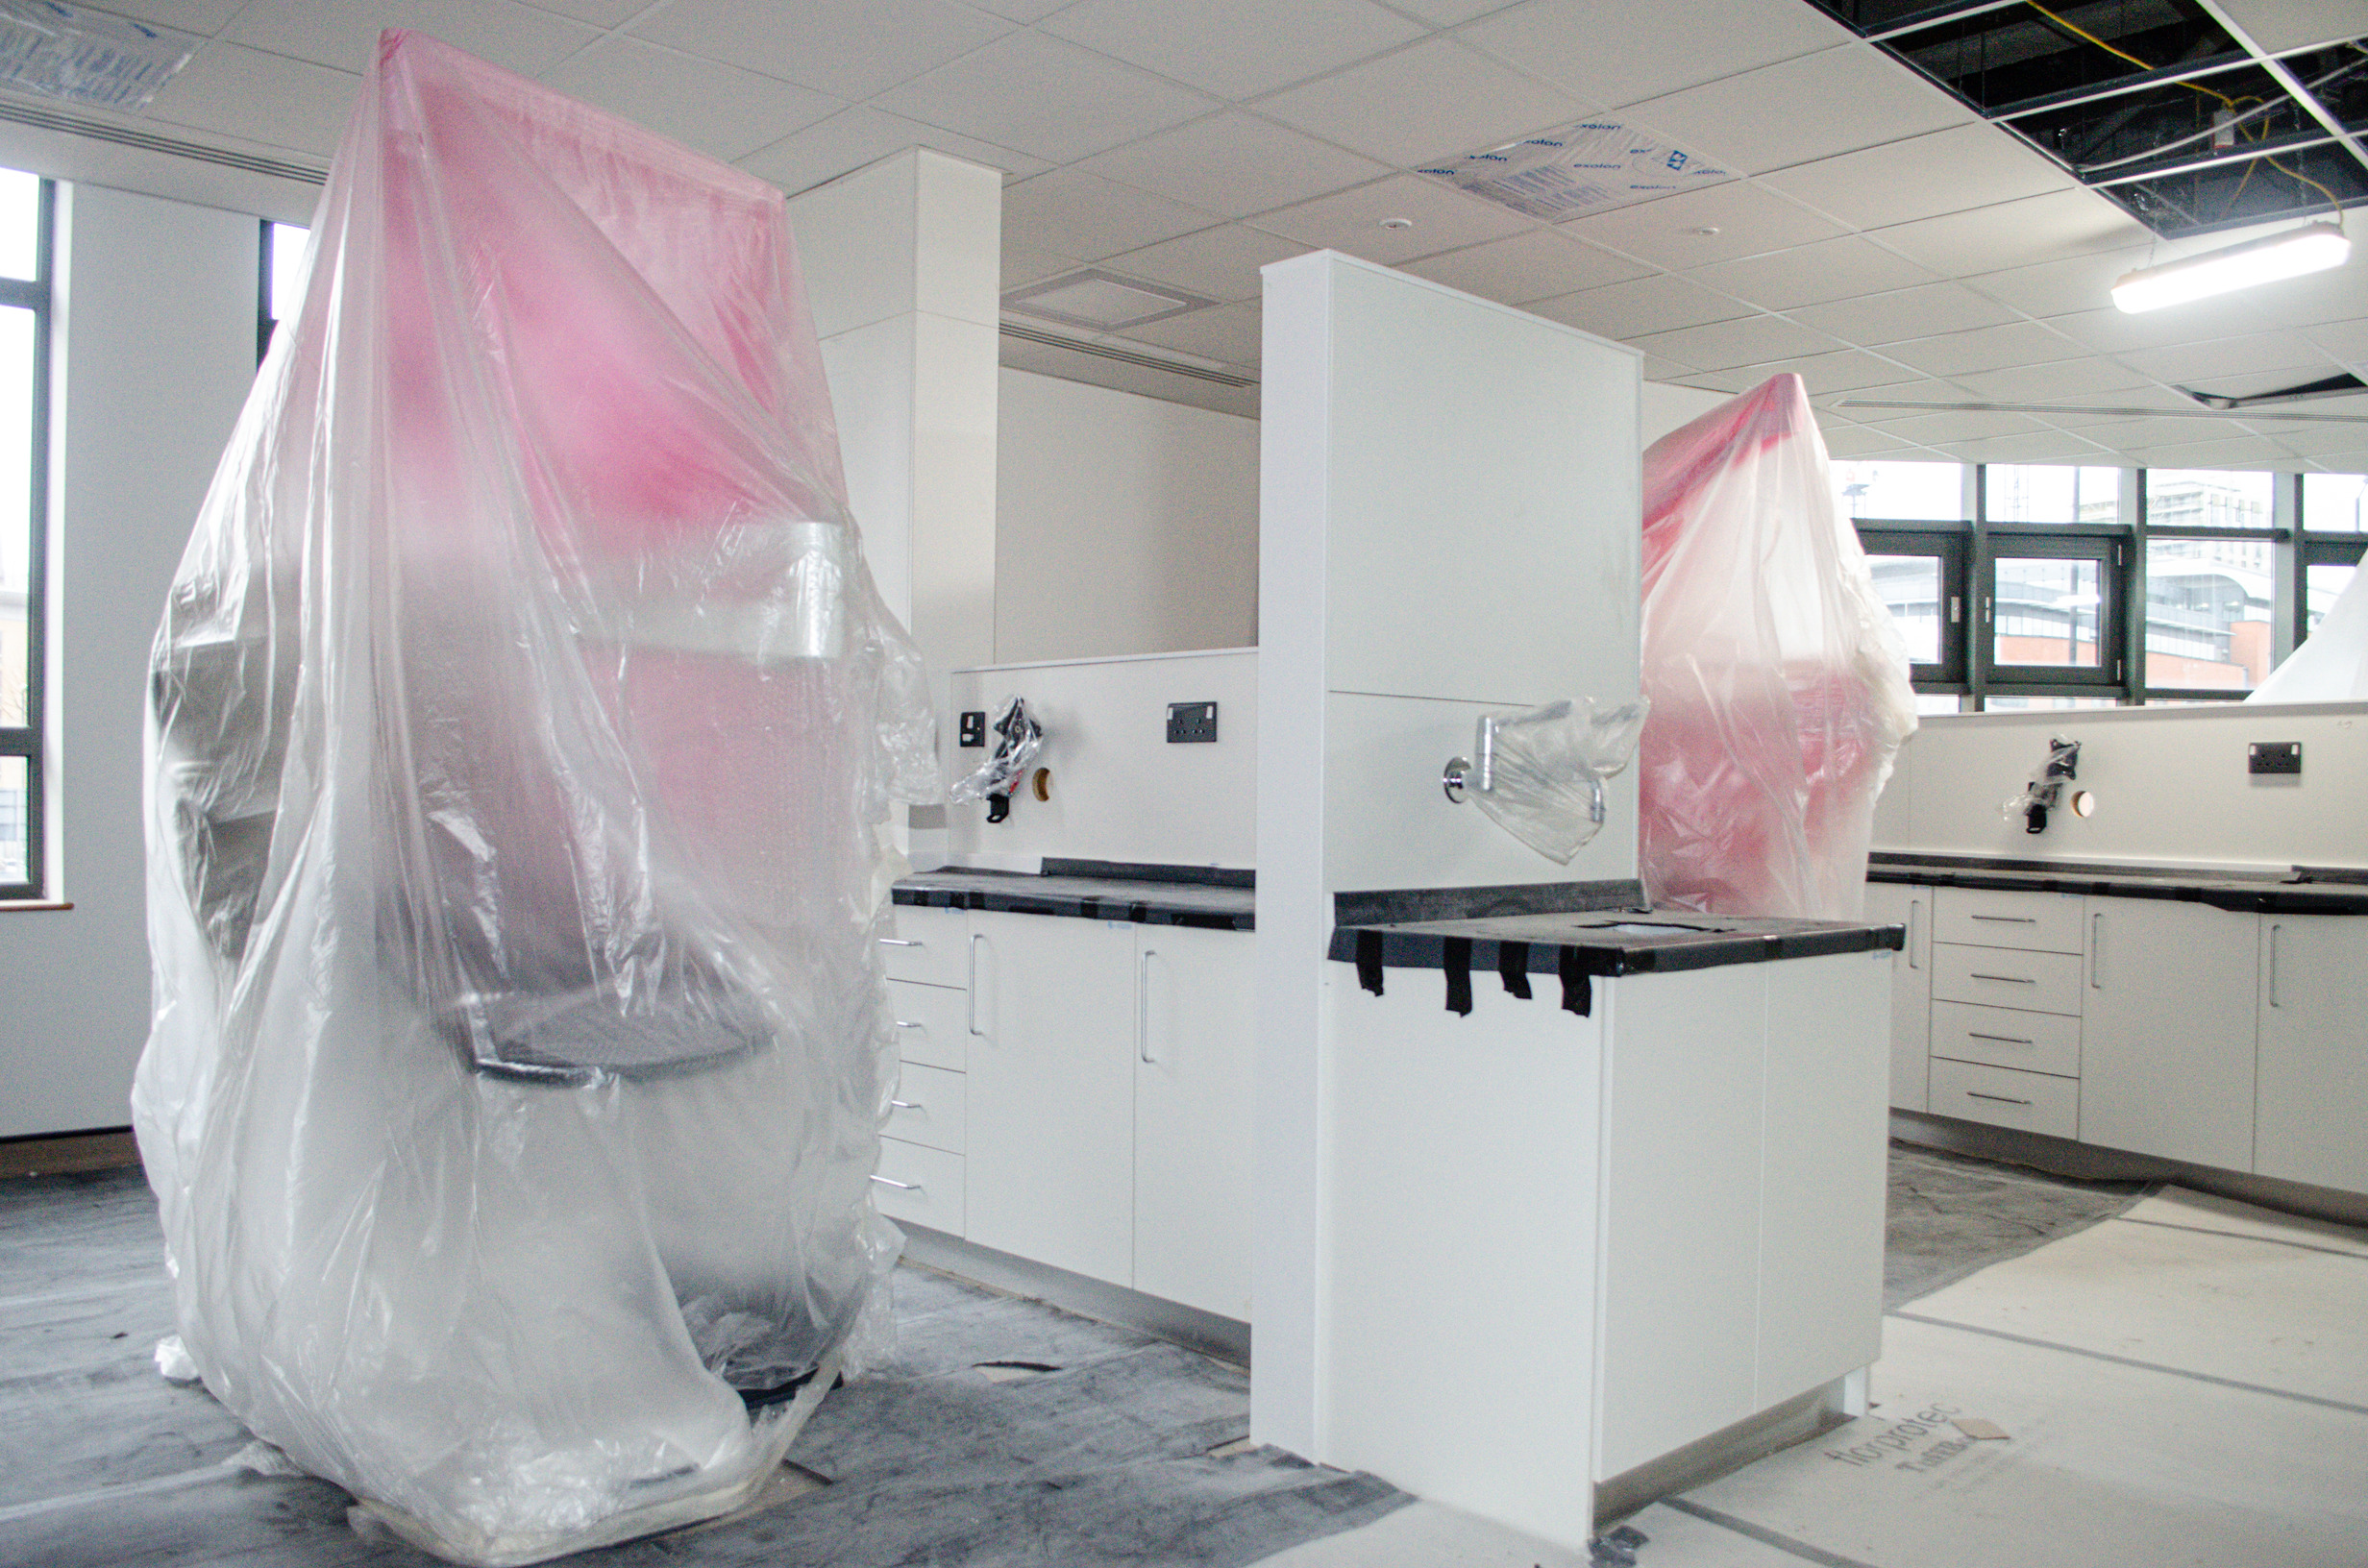 New dental bays and chairs during a tour in February